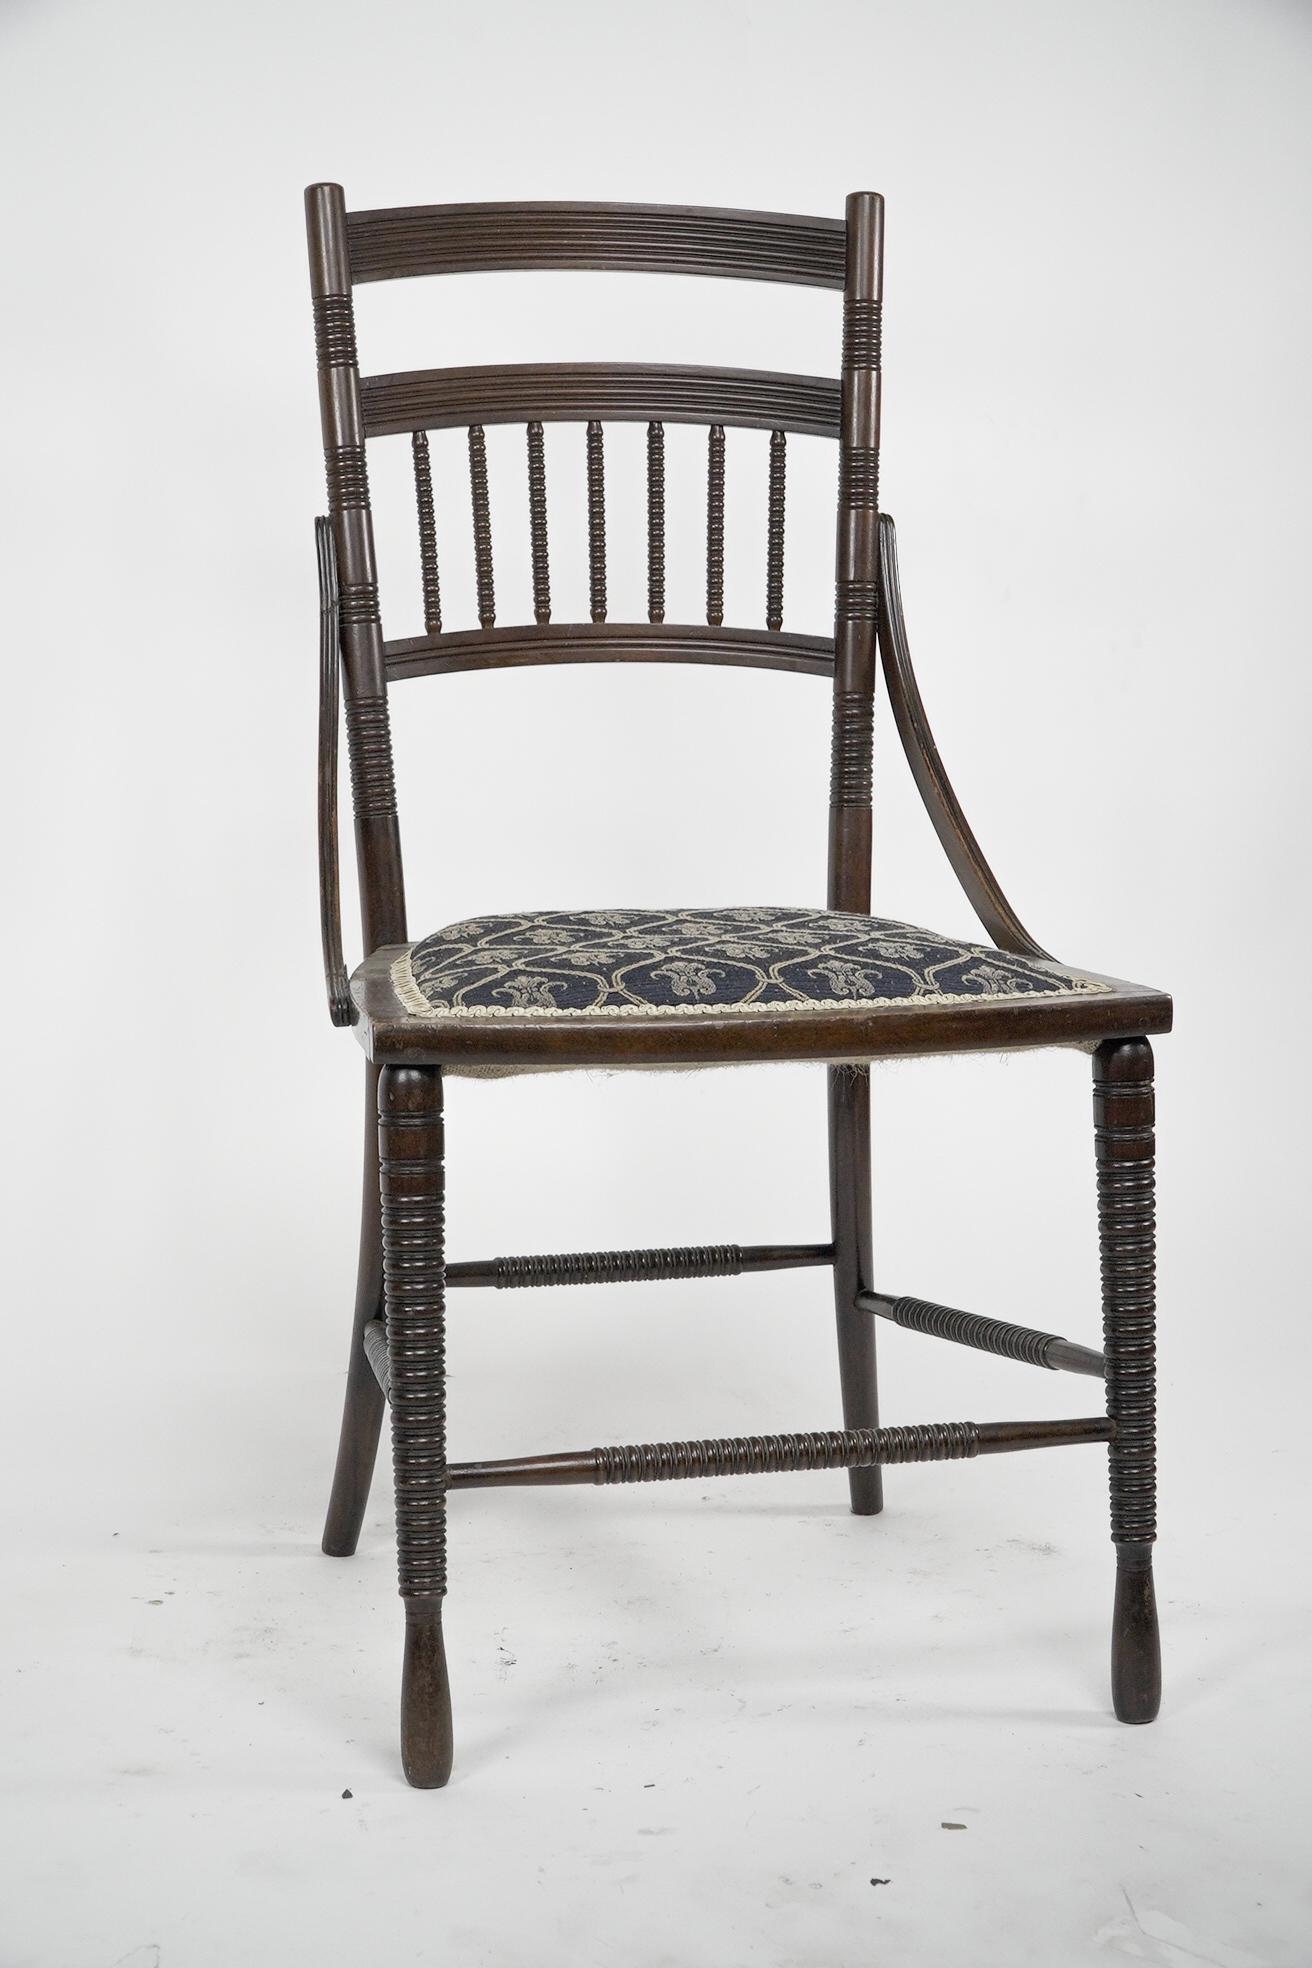 R. W. Edis, probably made by Jackson & Graham A fine pair of Walnut side chairs For Sale 1